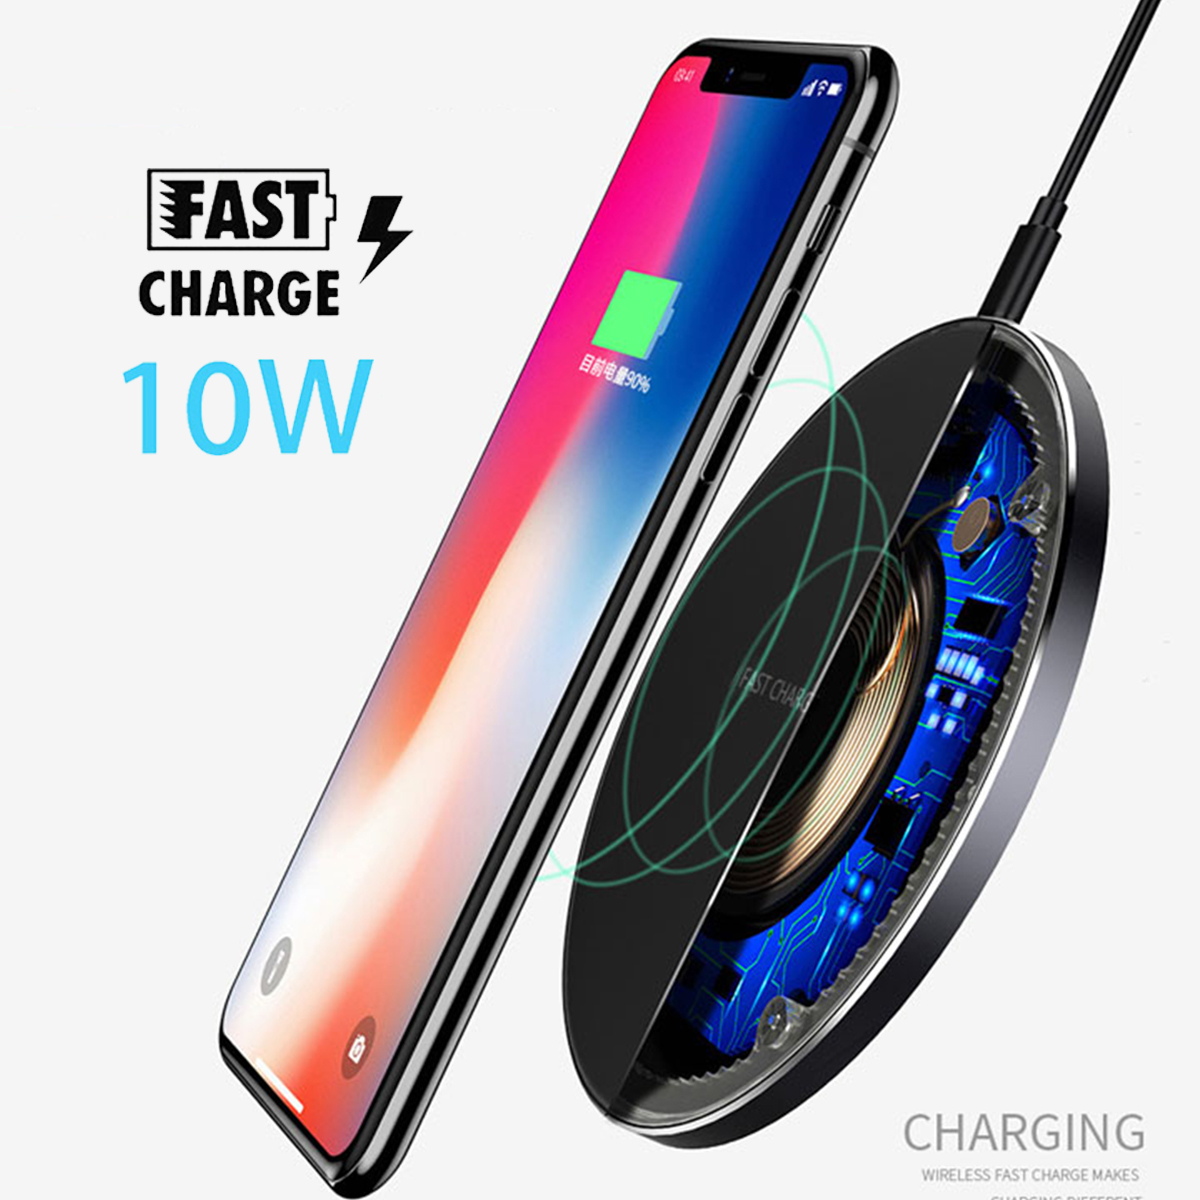 Bakeey-Aluminum-QI-Wireless-Fast-Charger-Charging-Dock-Pad-Mat-Phone-For-iPhone-XS-XR-X-1366096-6